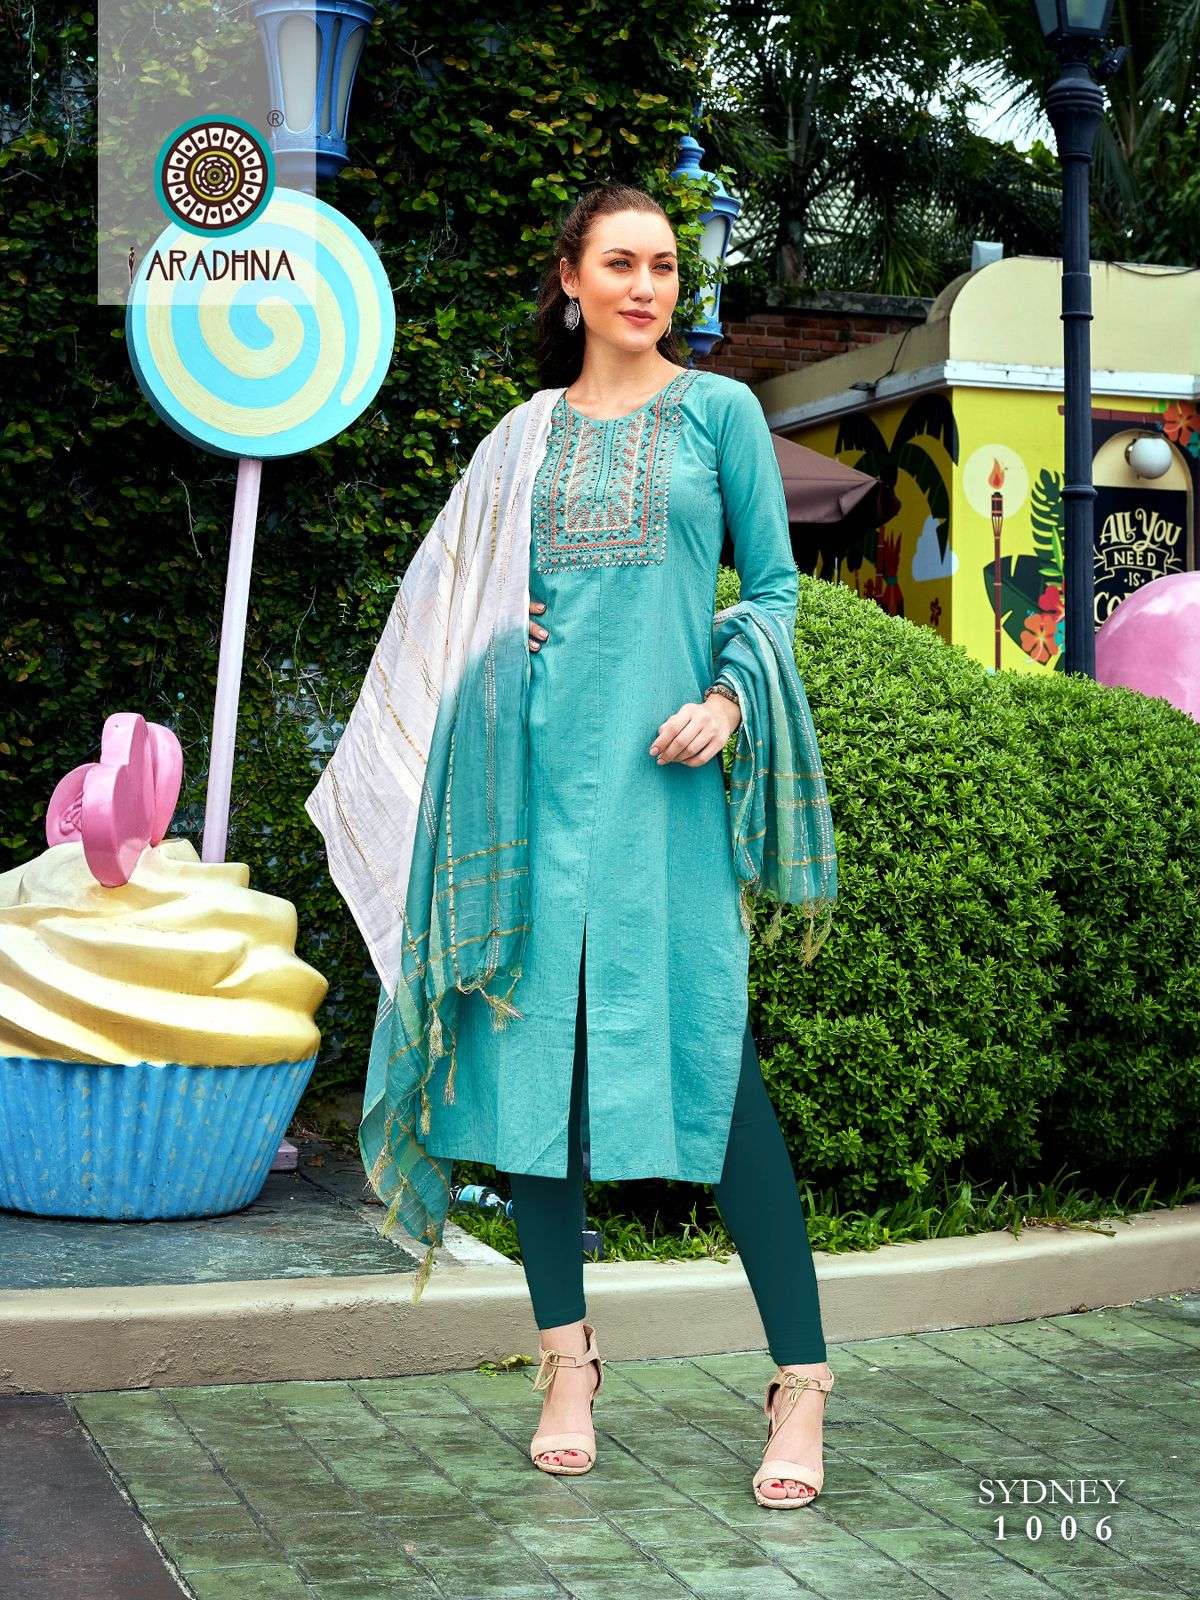 Sydney Vol-1 By Aradhna Fashion 1001 To 1006 Series Designer Stylish Fancy Colorful Beautiful Party Wear & Ethnic Wear Collection Cotton Embroidered Kurtis At Wholesale Price